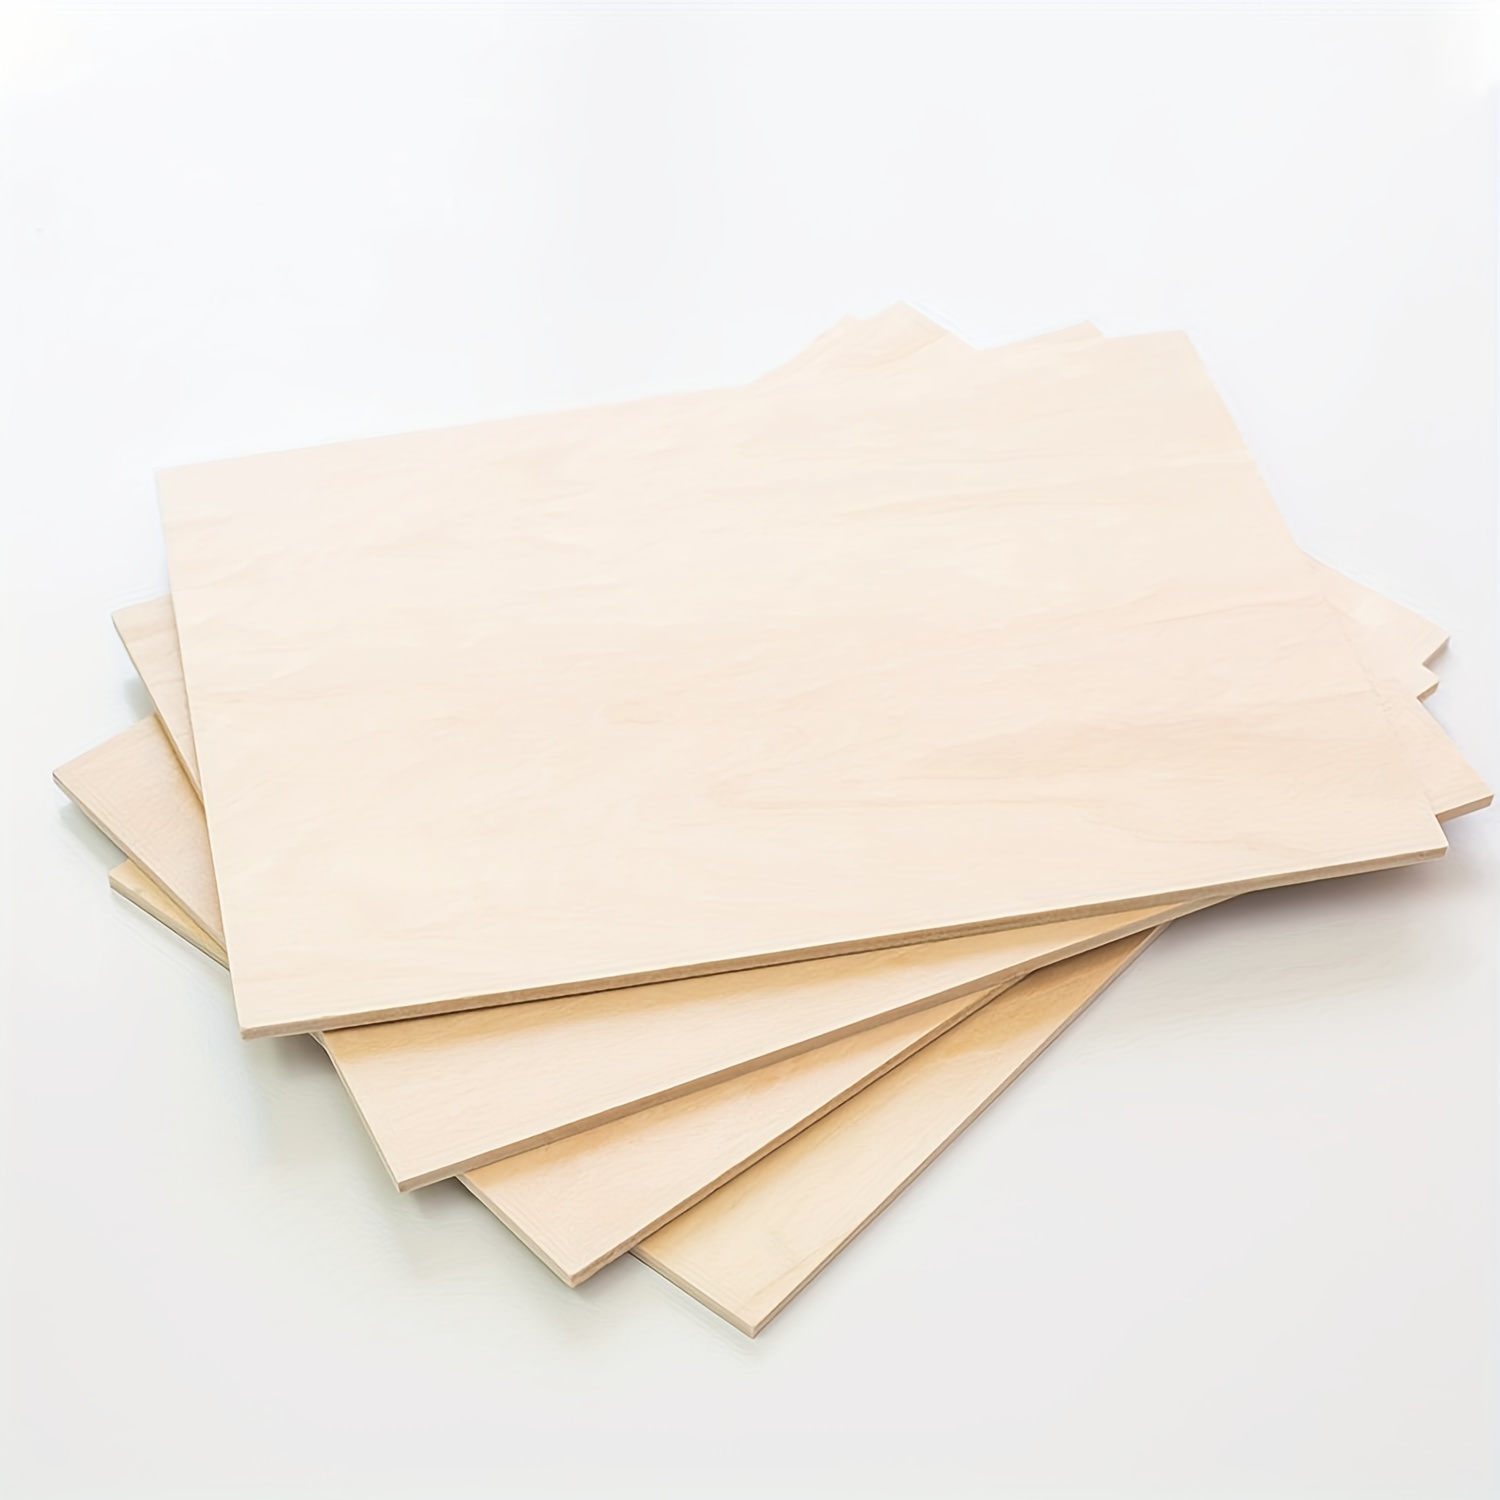 Unfinished Wood, 6 Pack Basswood Sheets for Crafts, Craft Wood Board for House Aircraft Ship Boat Arts and Crafts, School Projects, Wooden DIY